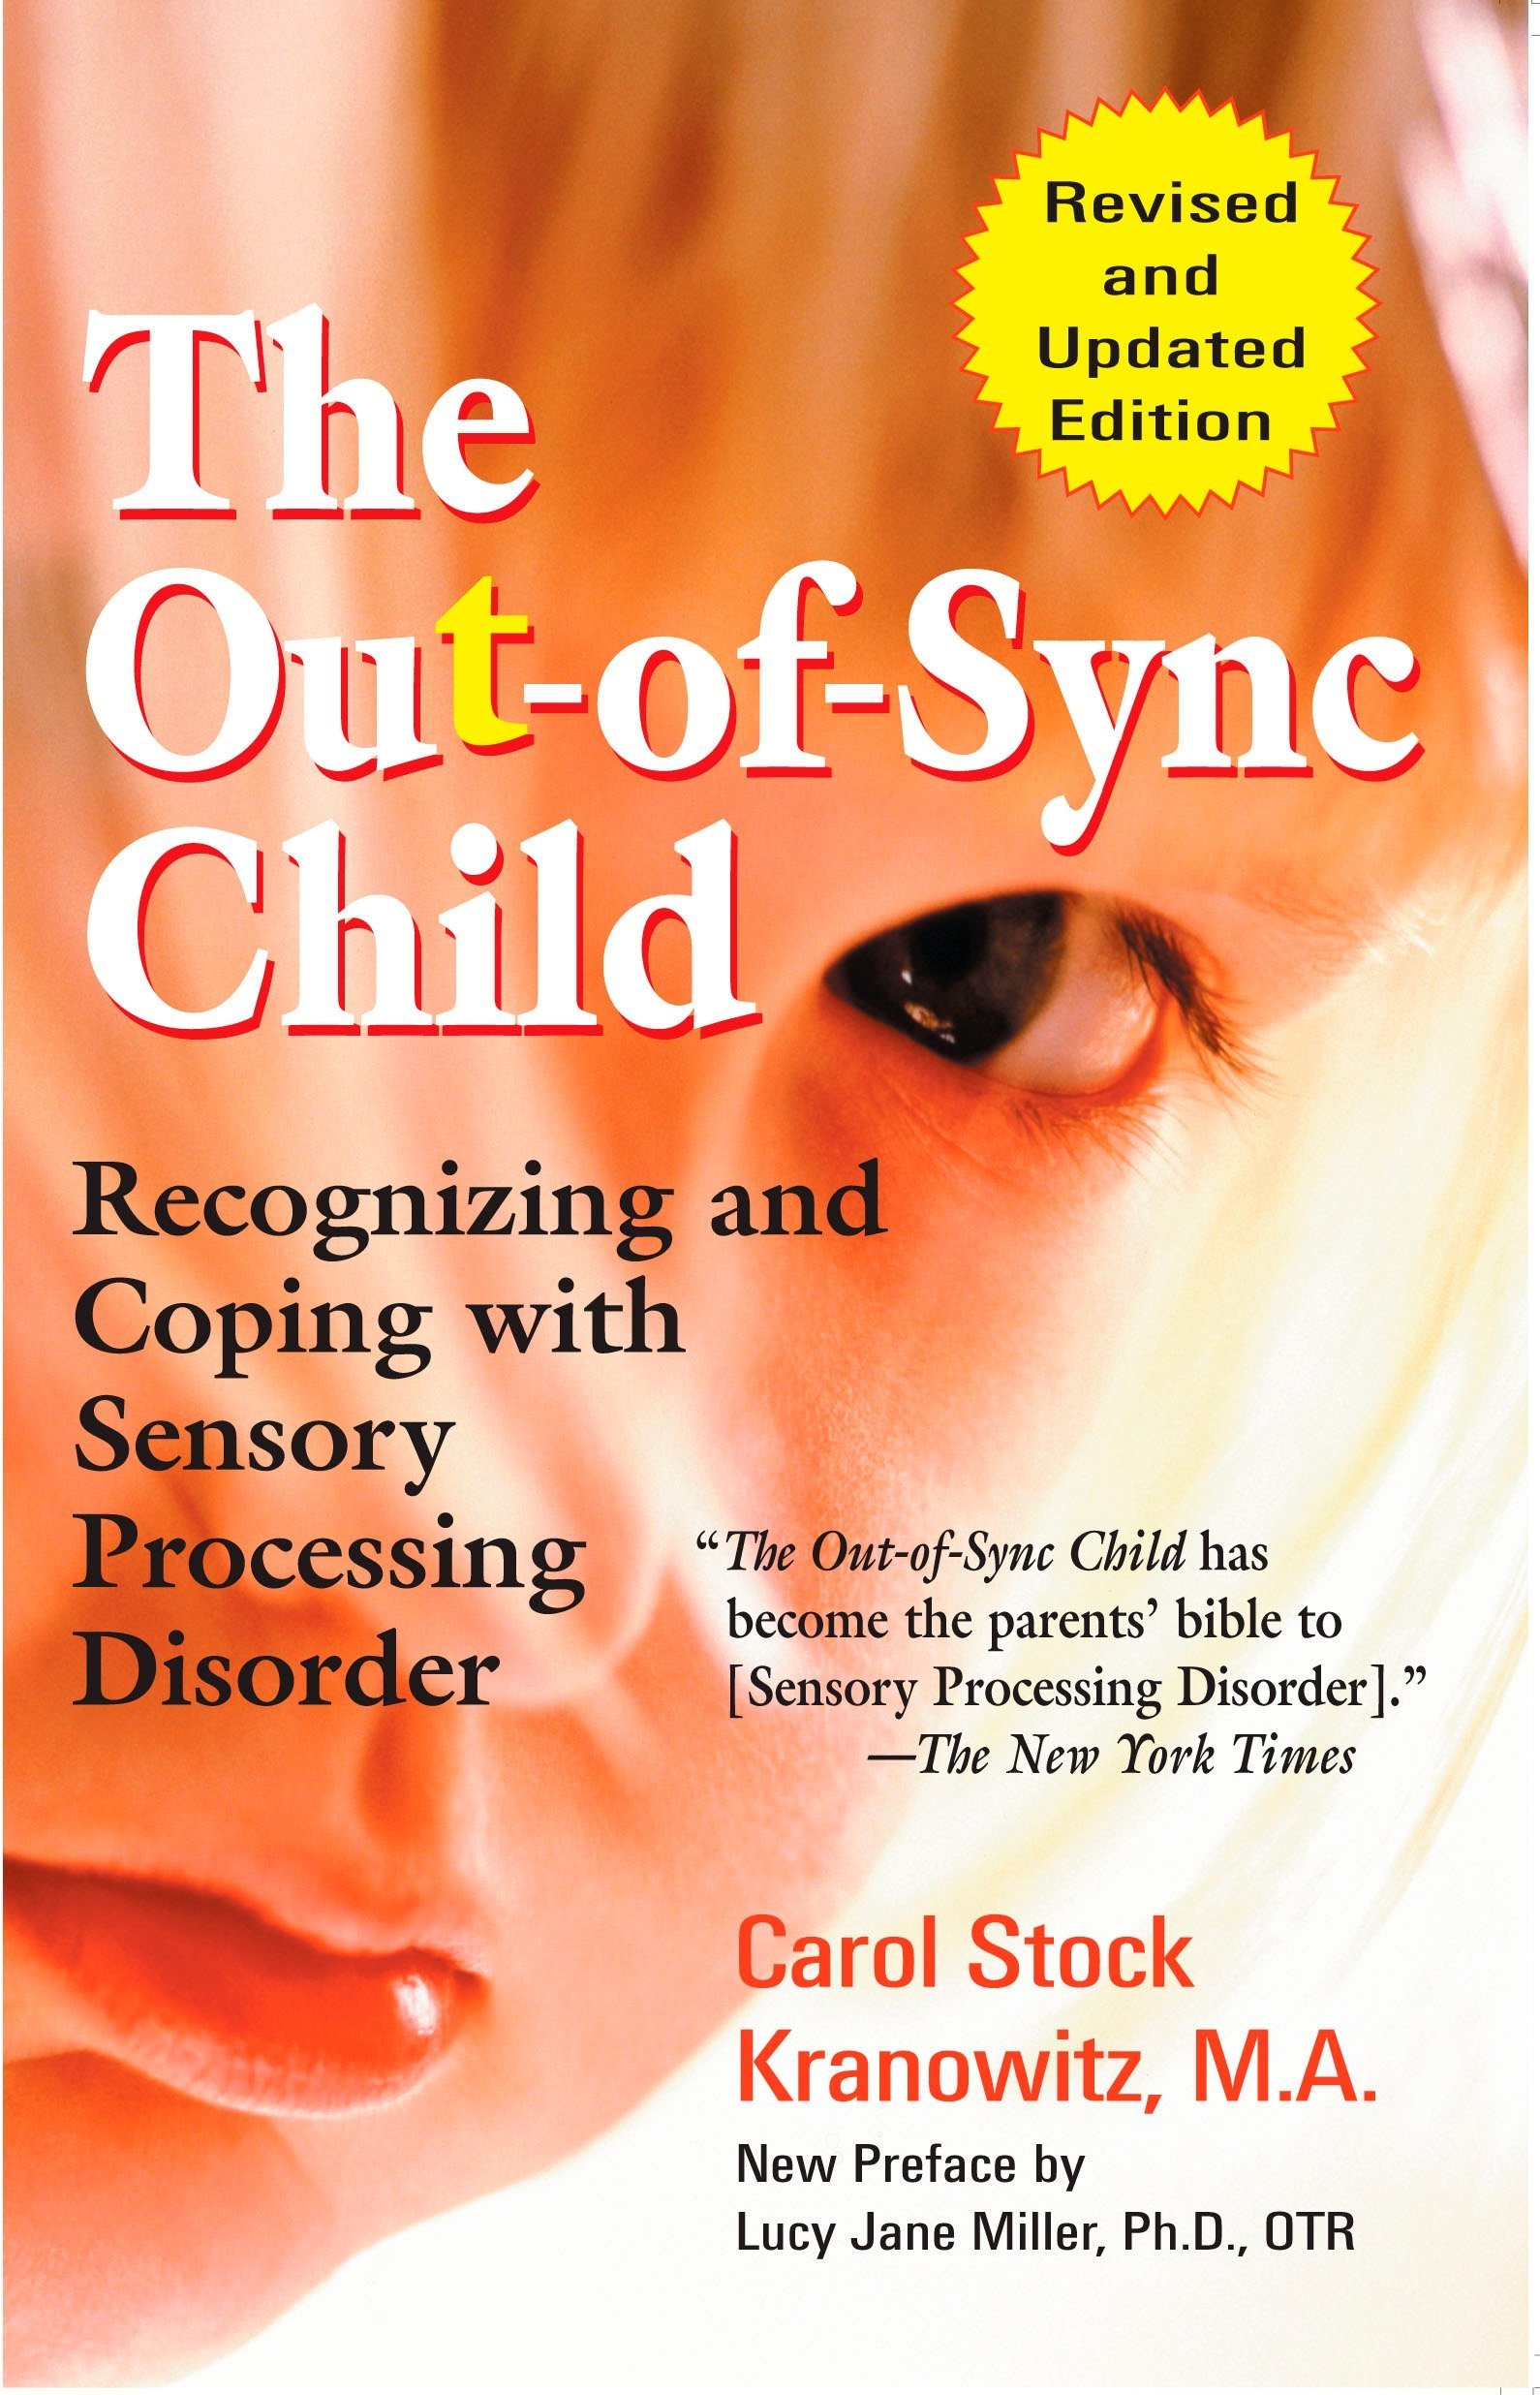 The Out-of-Sync Child: Recognizing and Coping with Sensory Processing Disorder – Carol Stock Kranowitz